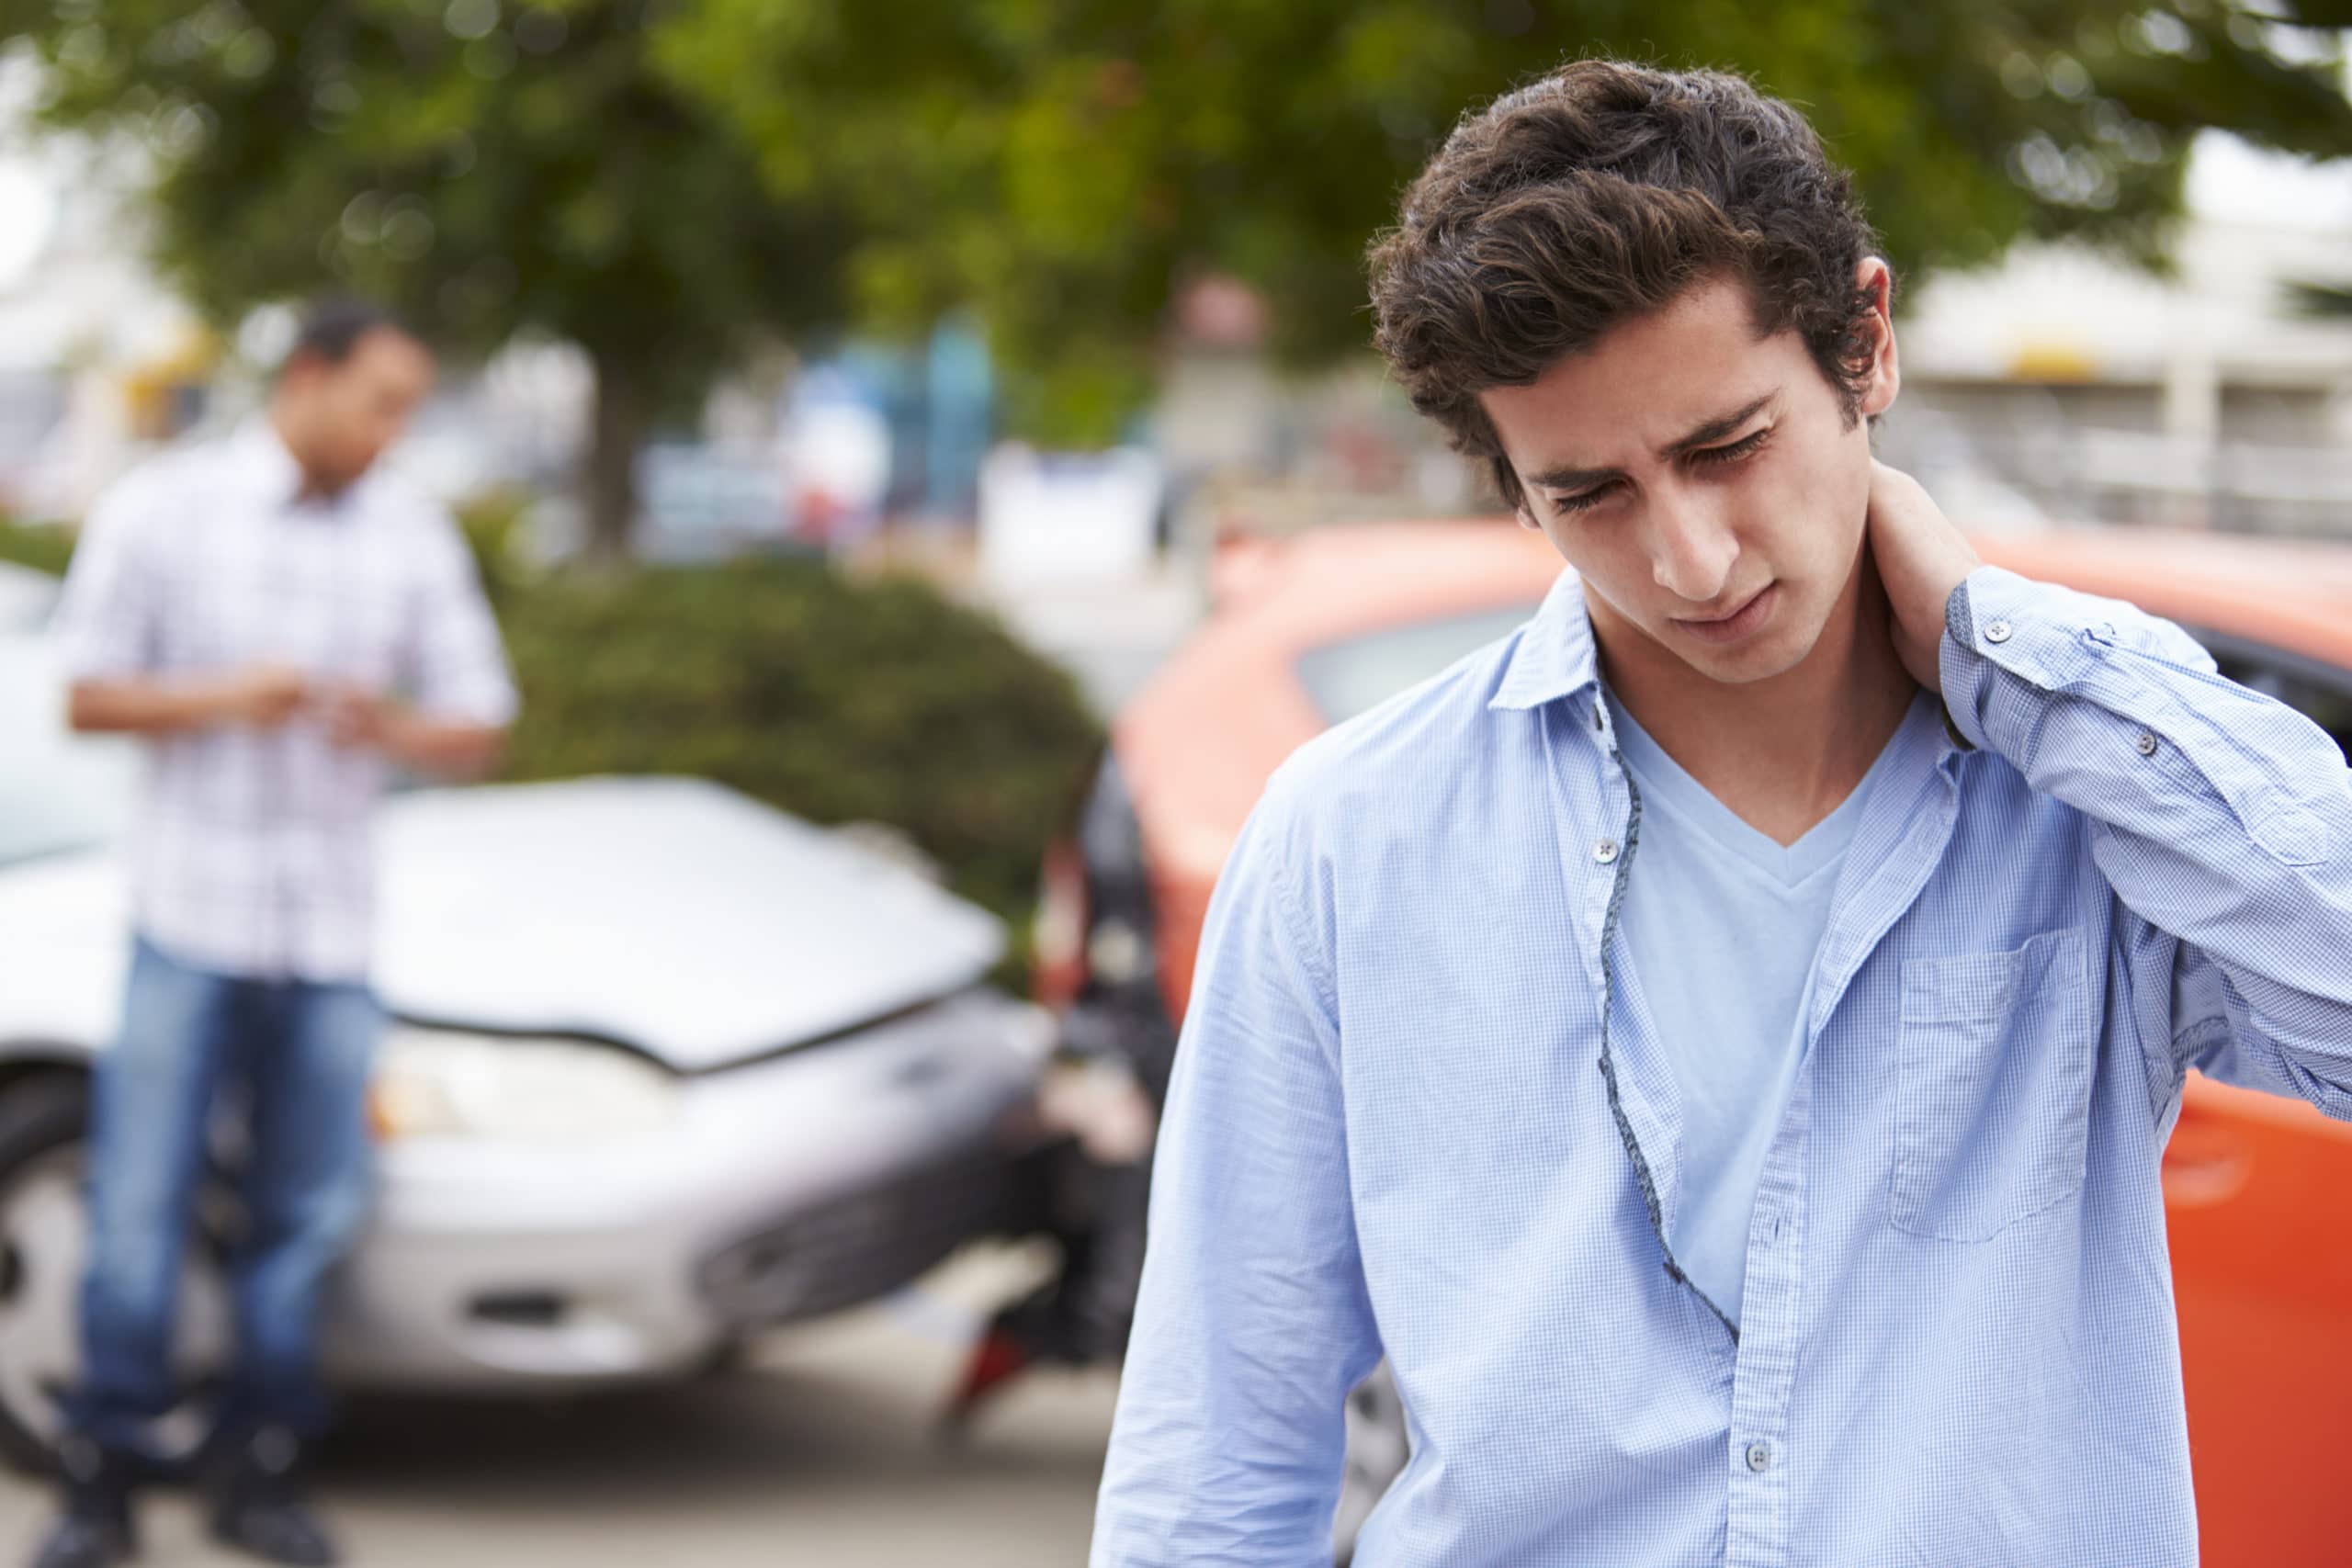 Pinnacle Chiropractic Highlands Ranch, CO Auto Accidents